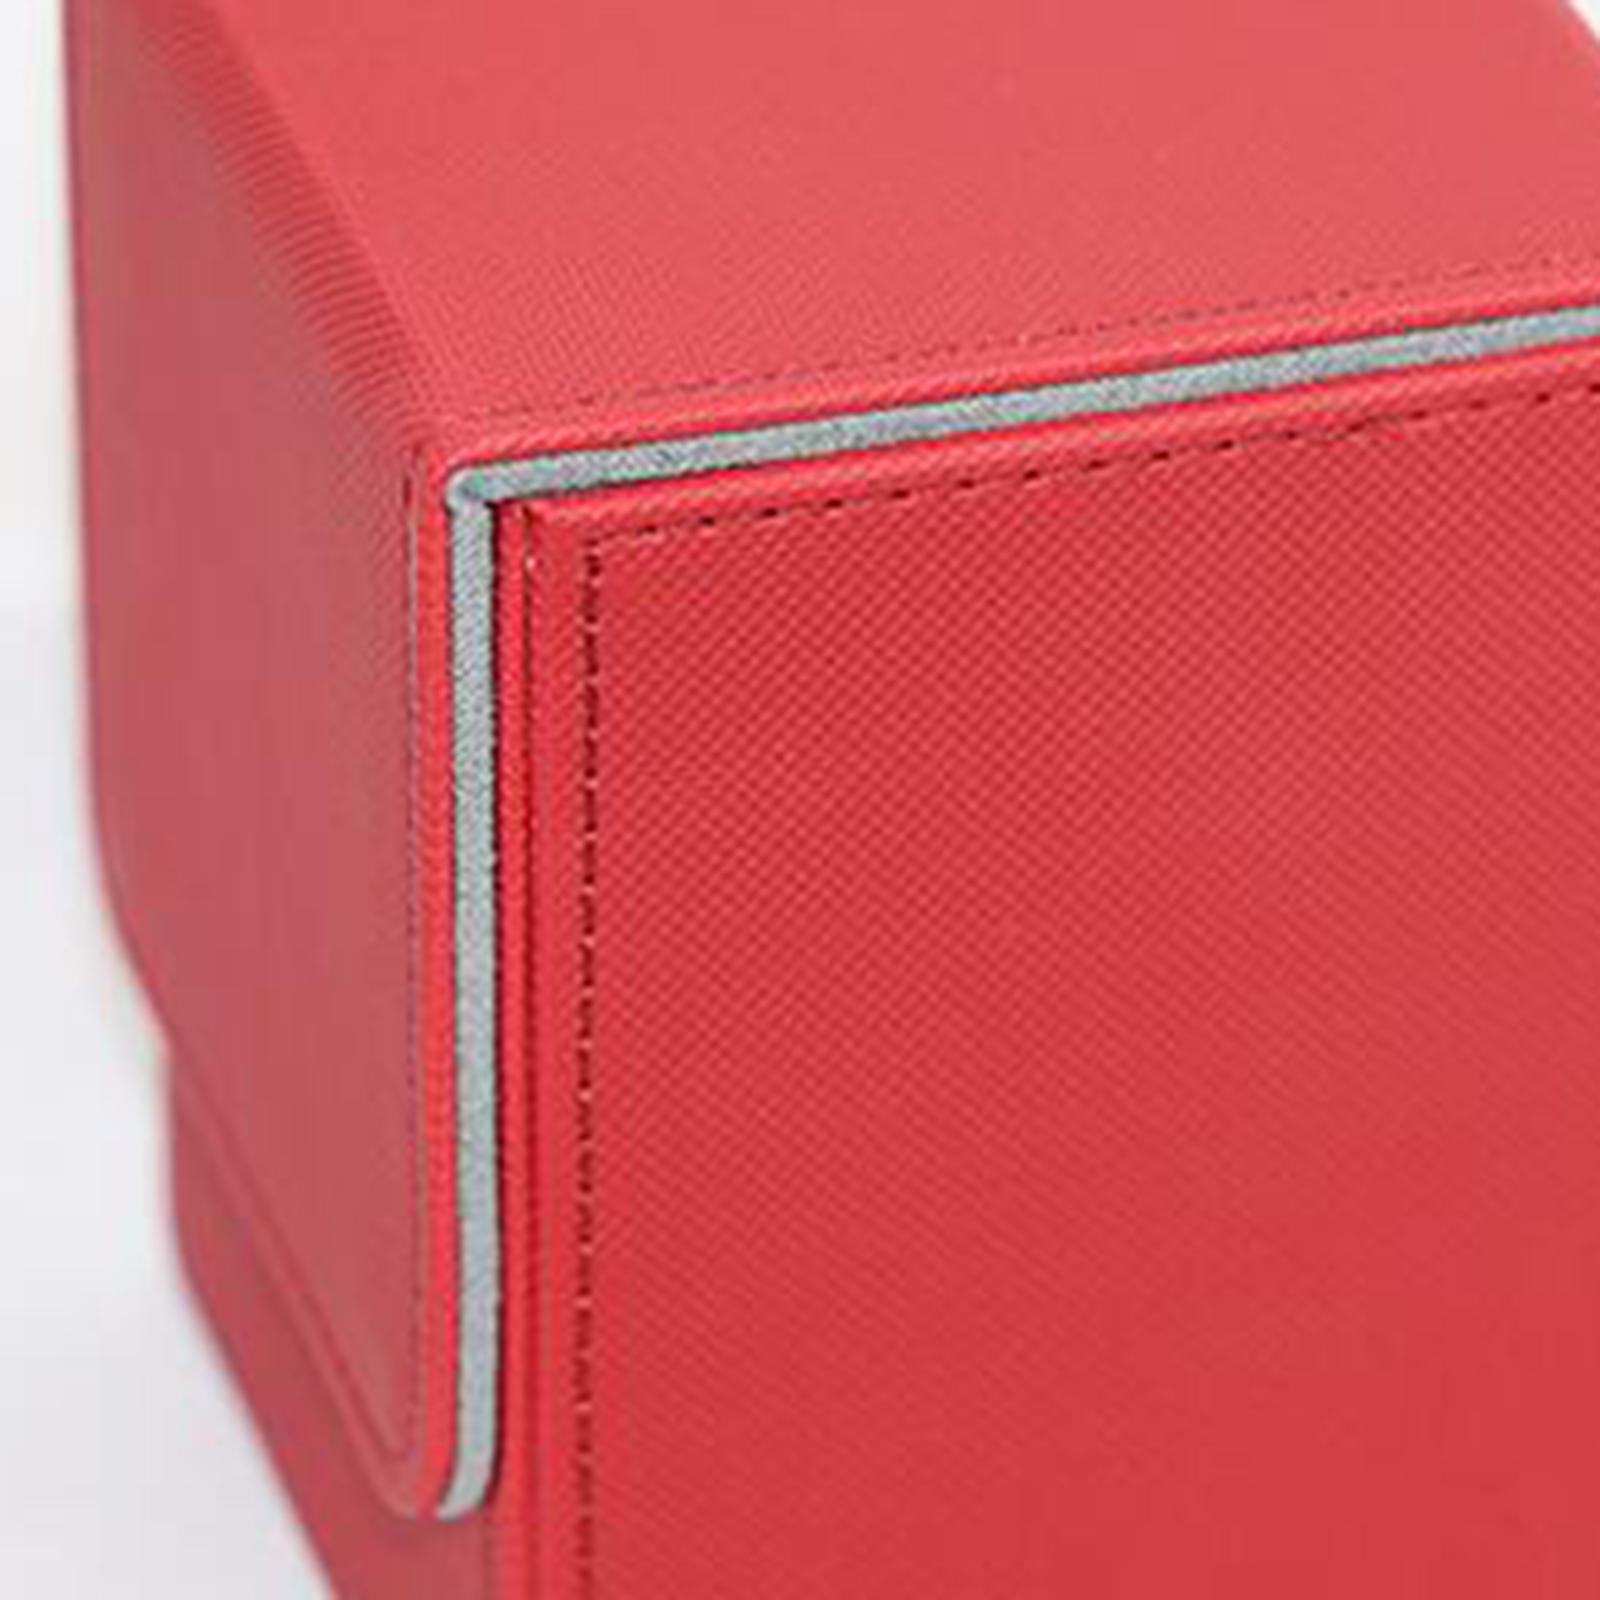 Trading Card Deck Box Organizer Storage Holder Holds 100+ Card for MTG Card Red